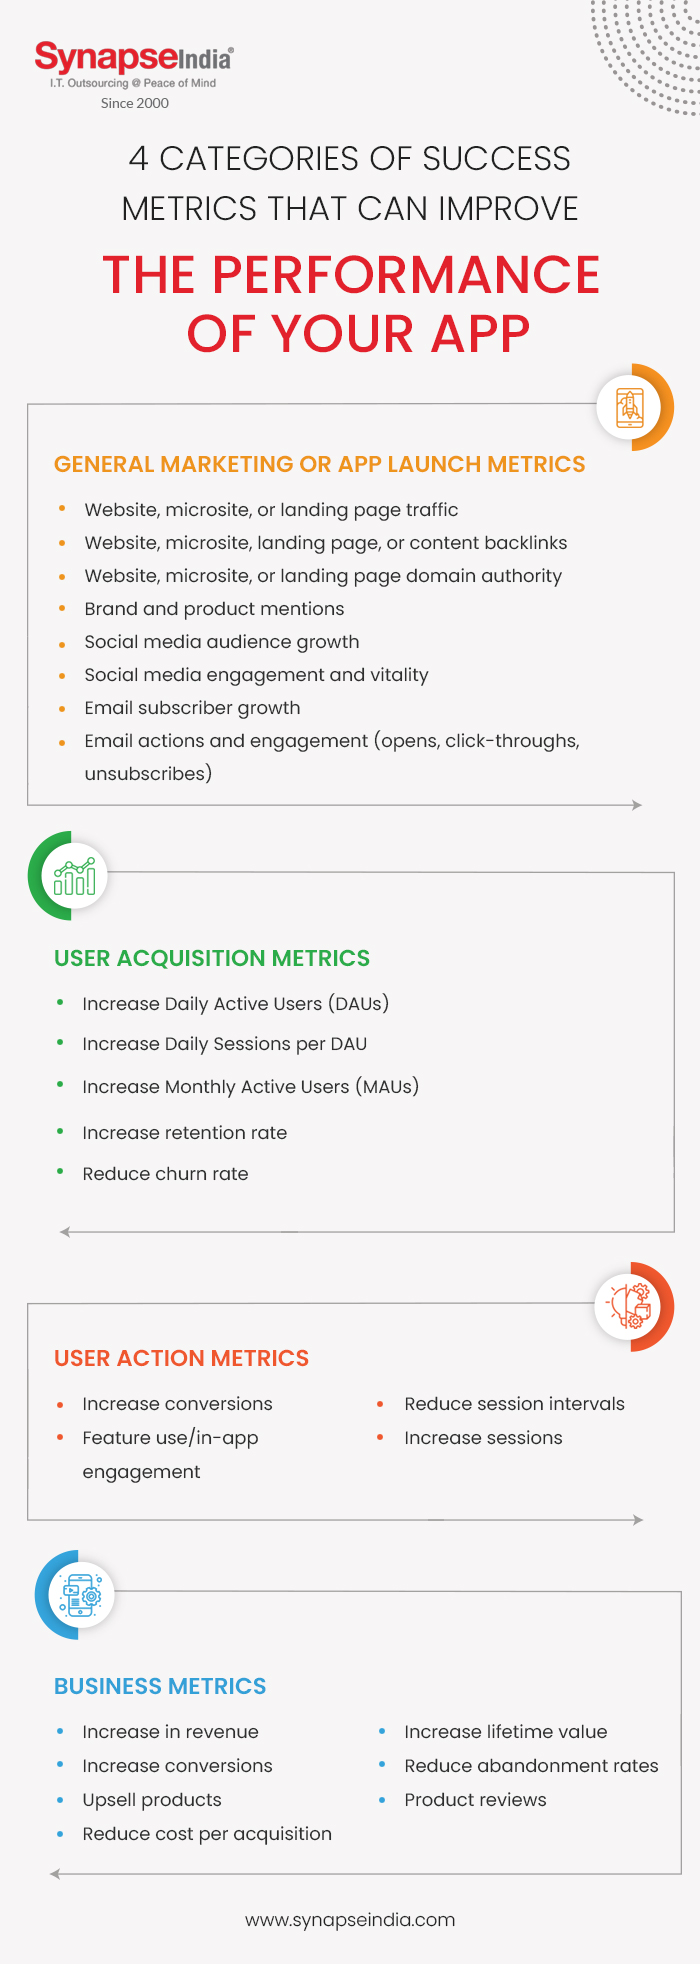 4 Categories of Success Metrics that can Improve the performance of your app - infographic